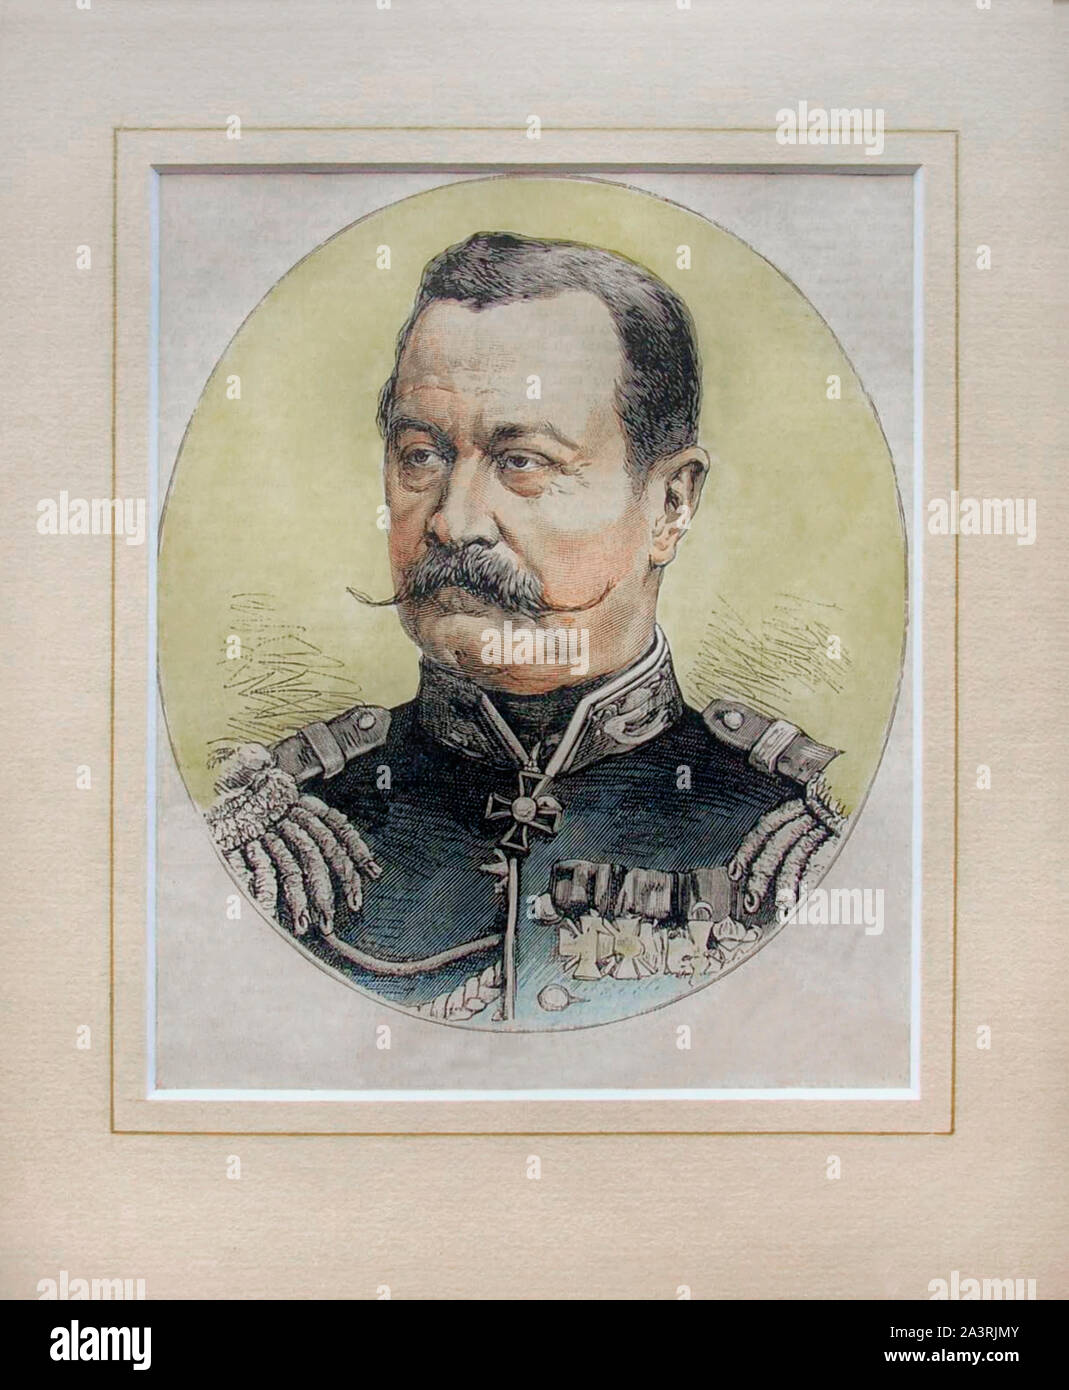 Nikolay Vladimirovich Mezentsov (1827 – 1878) was a Russian statesman, adjutant general (1871), and member of the State Council of Imperial Russia (18 Stock Photo